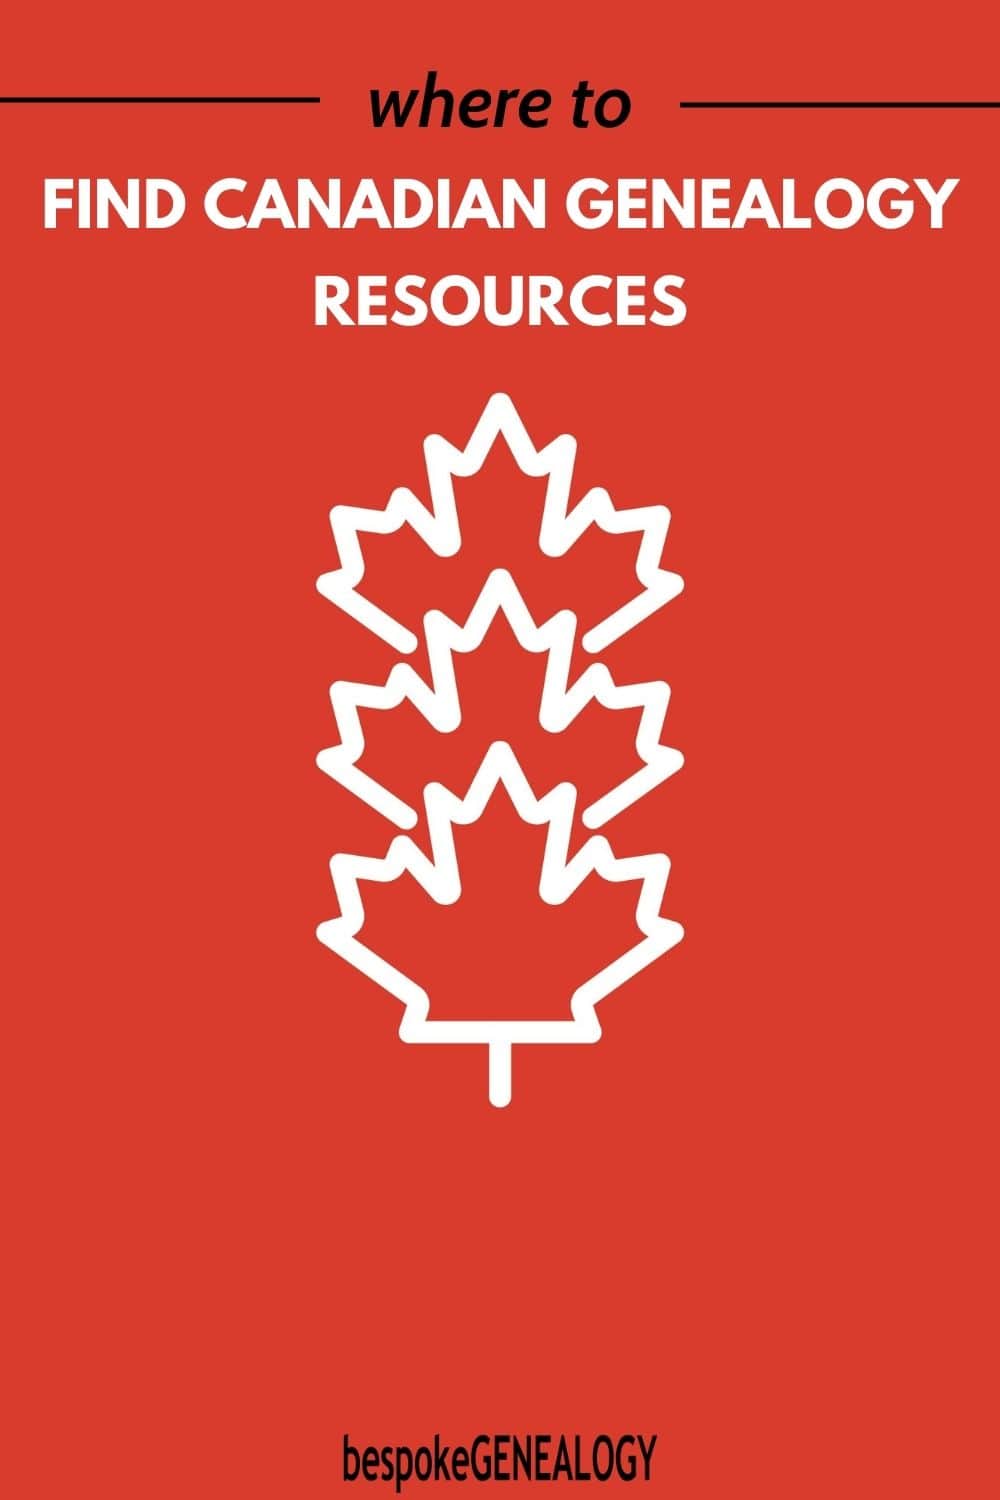 Where to find Canadian genealogy resources. Graphic of three Canadian maple leaves.